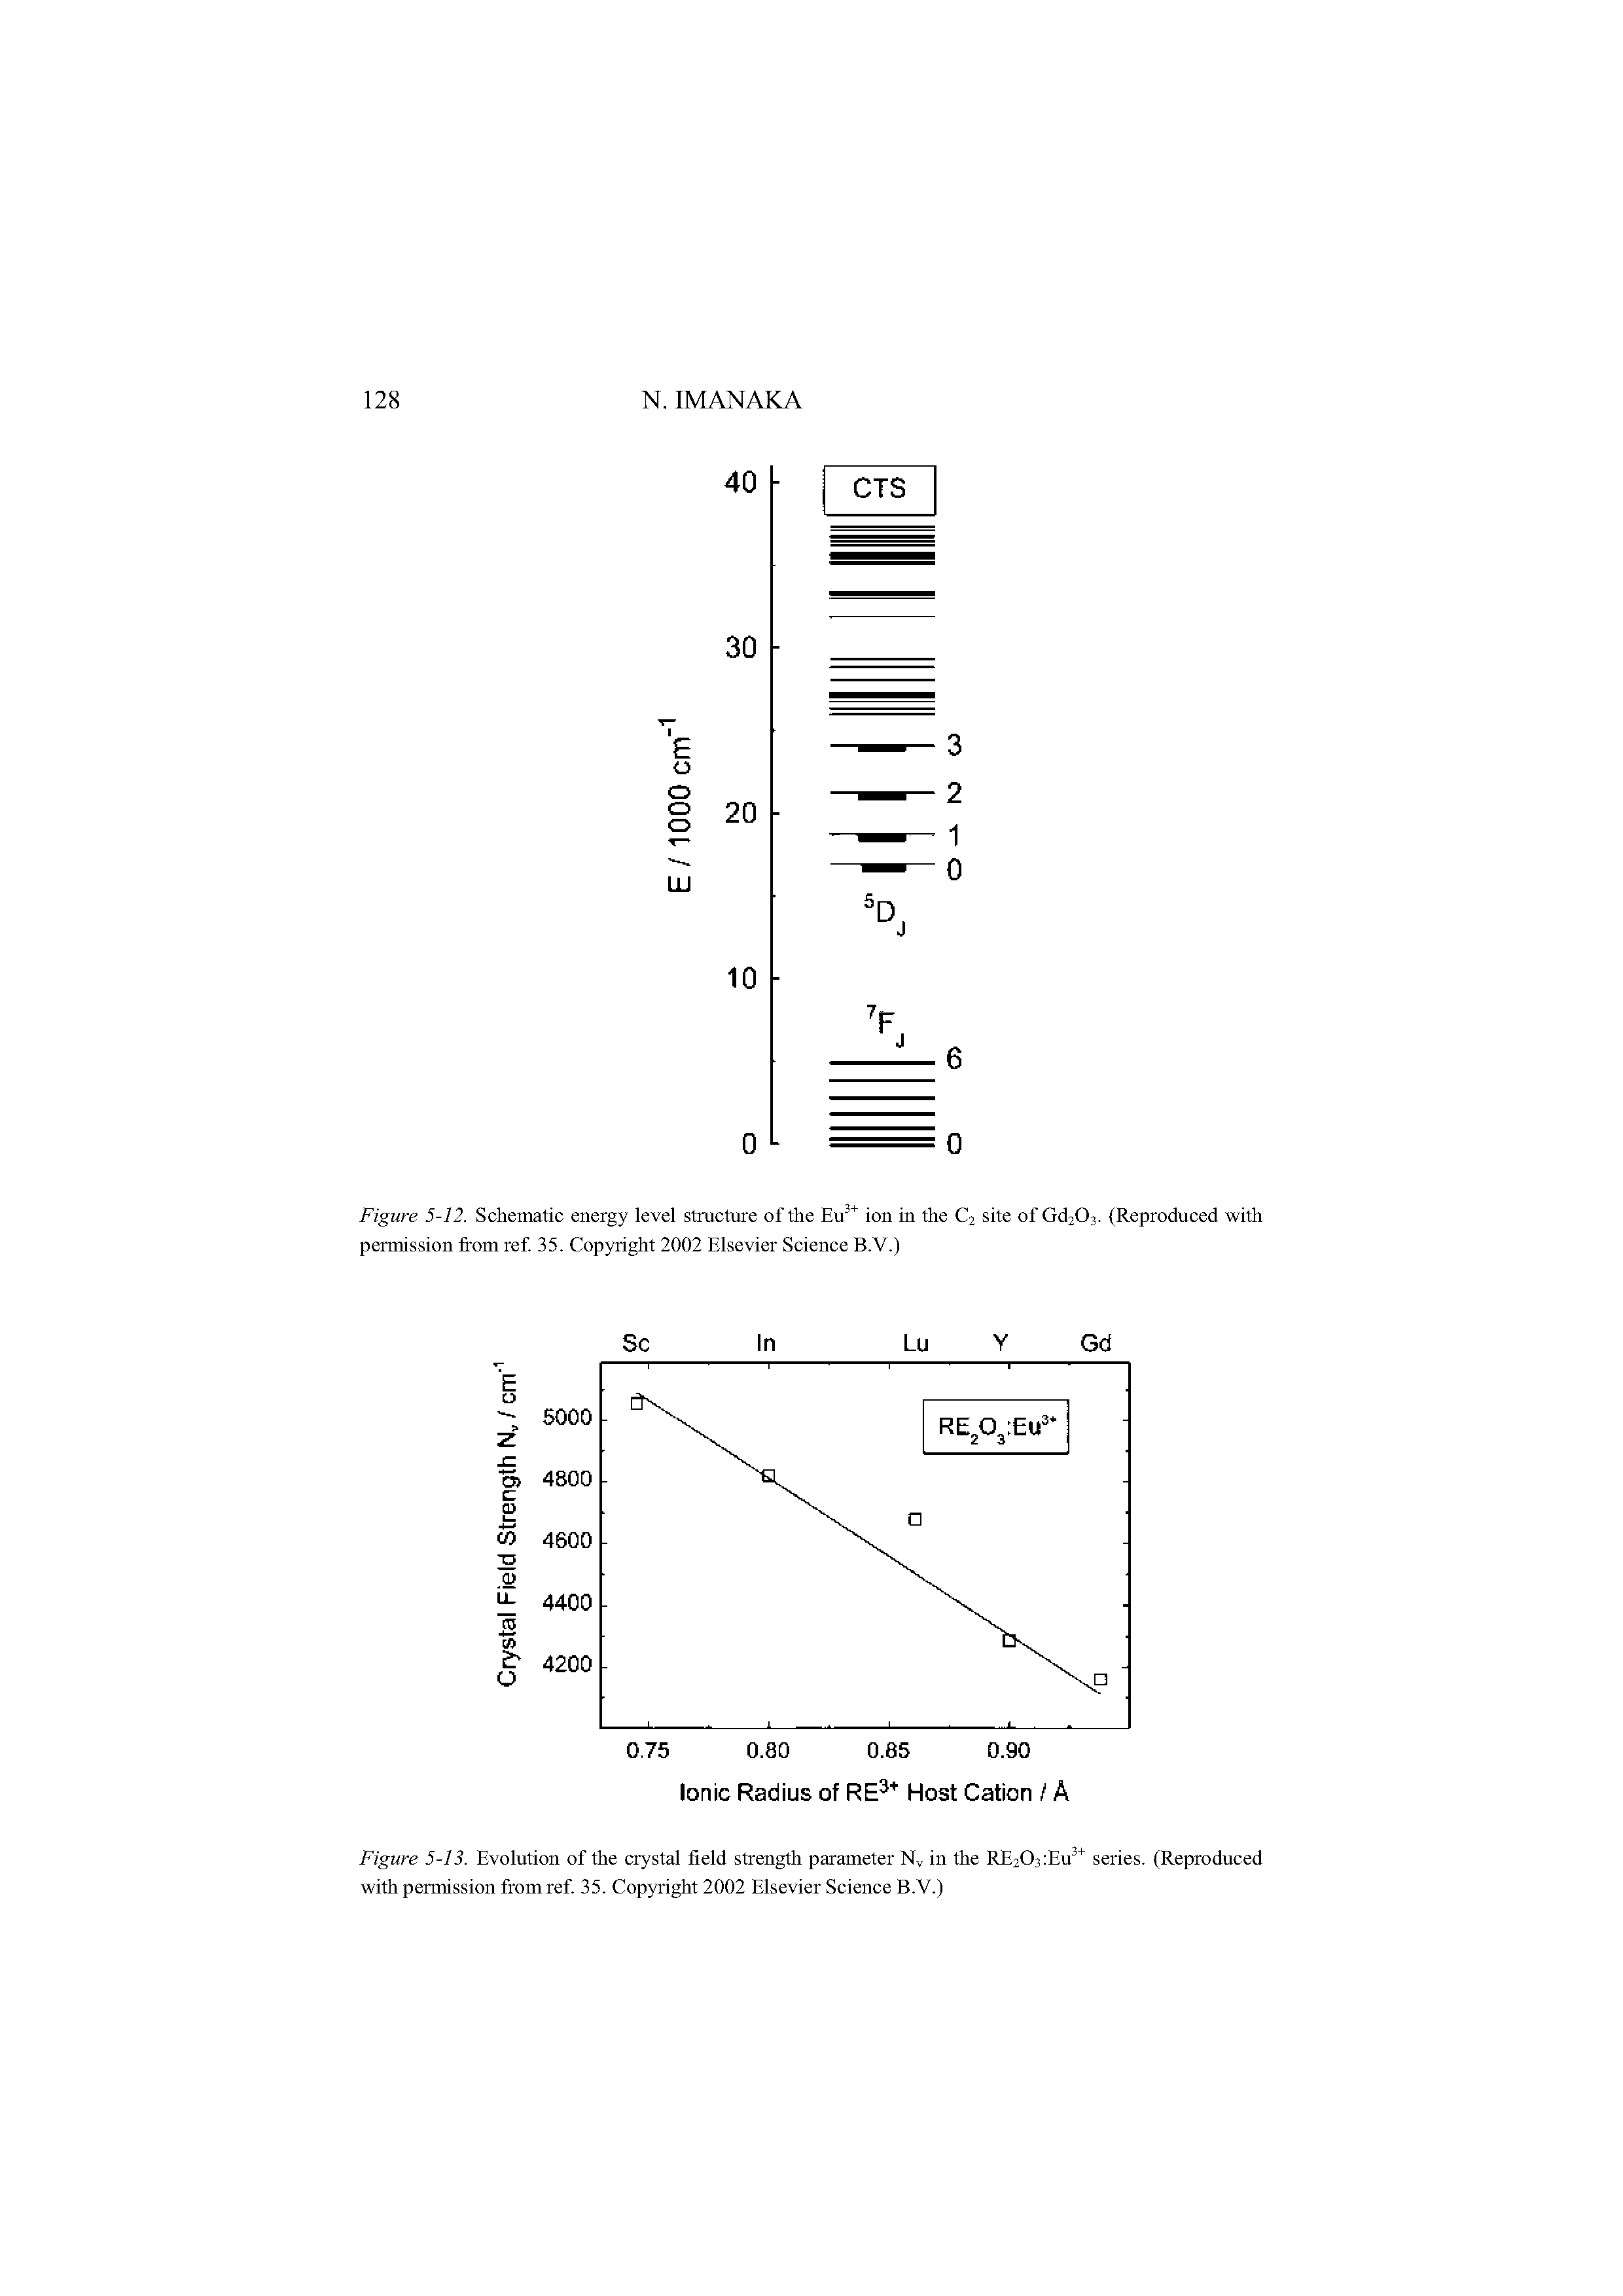 Figure 5-13. Evolution of the crystal field strength parameter Ny in the RE203 Em series. (Reproduced with permission from ref. 35. Copyright 2002 Elsevier Science B.V.)...